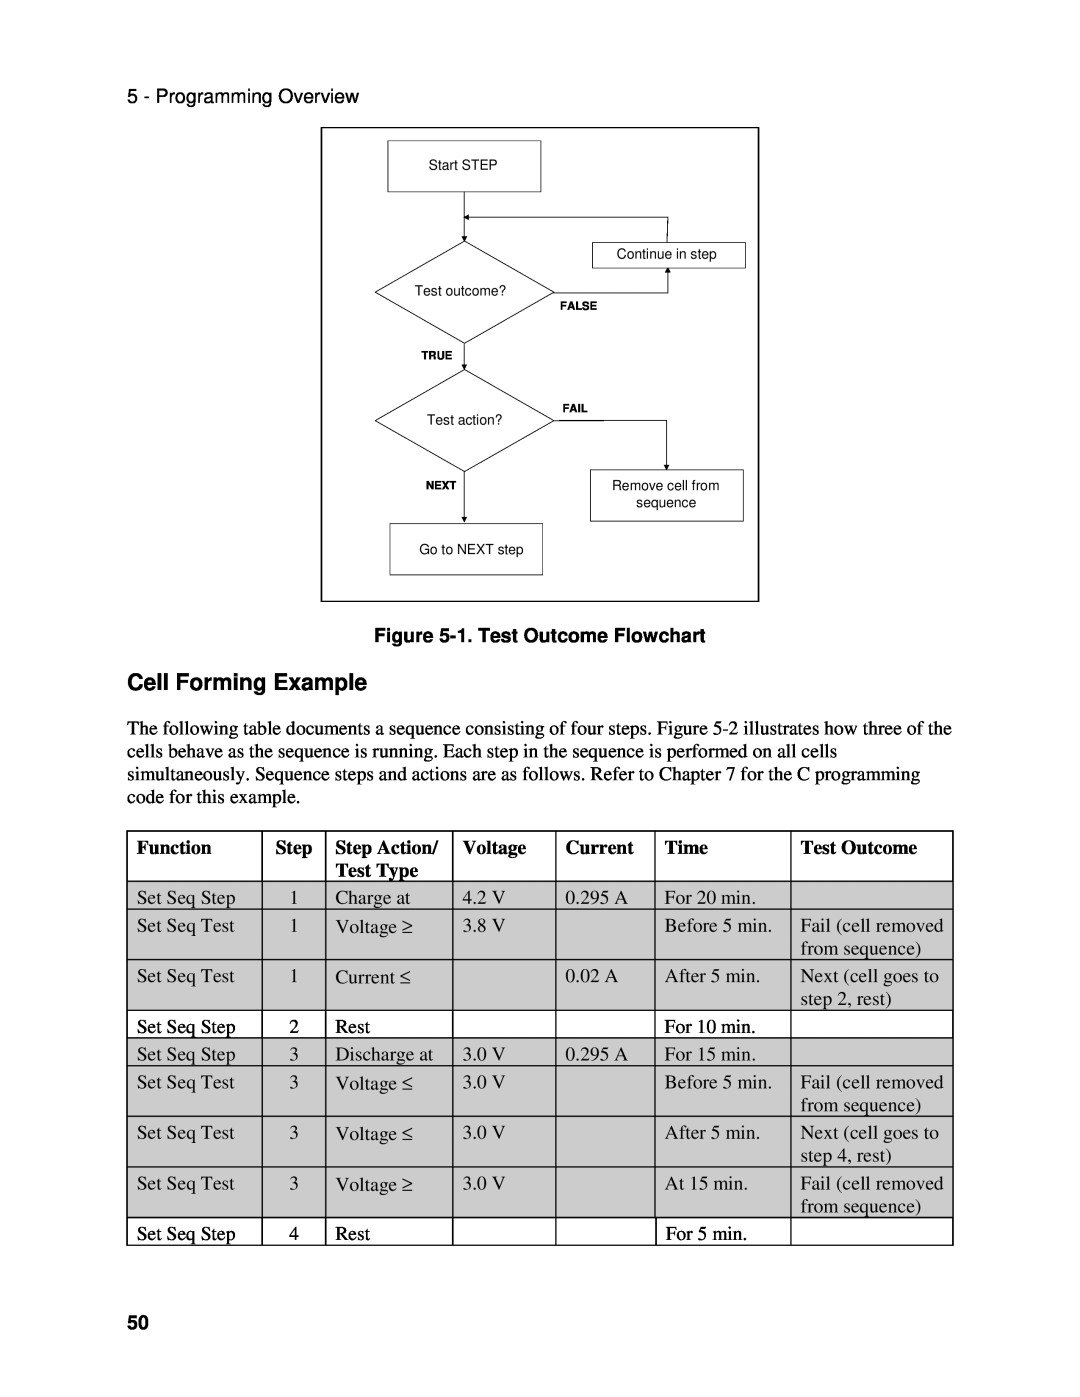 Agilent Technologies E4374A manual Cell Forming Example, 1. Test Outcome Flowchart, Function, Step, Voltage, Current, Time 